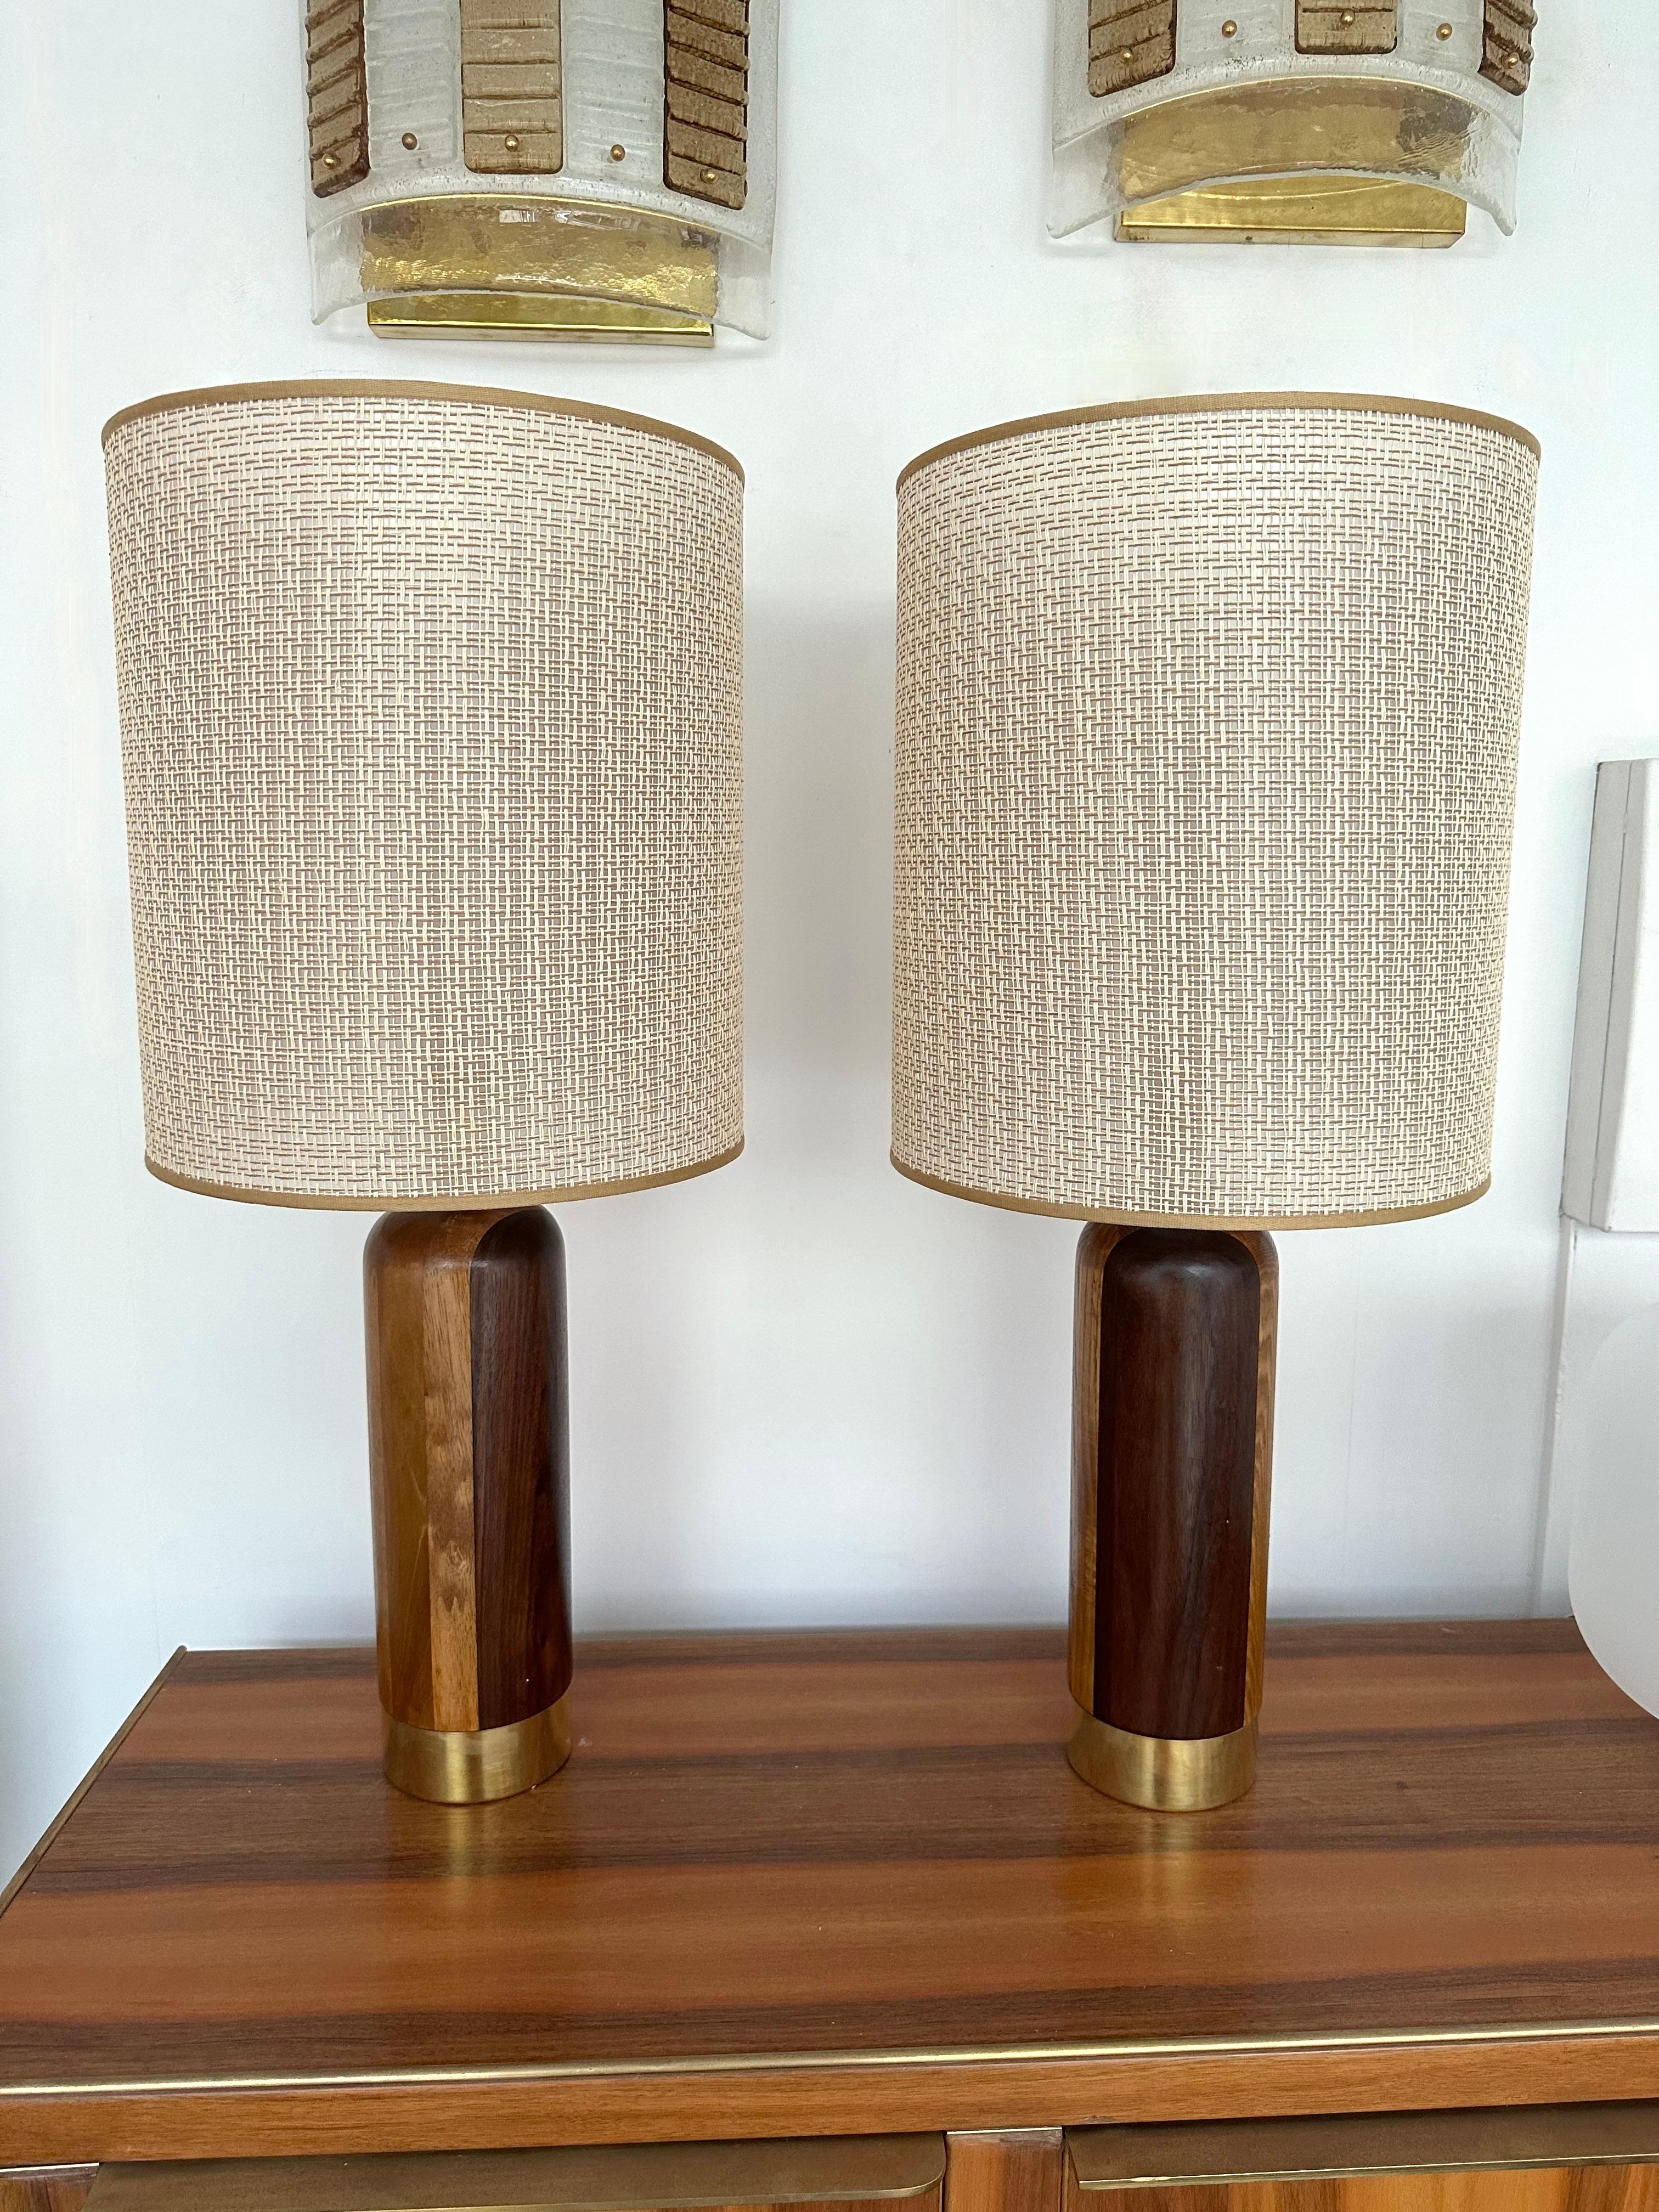 Contemporary Pair of Wood and Brass Lamps, Italien (Italienisch) im Angebot